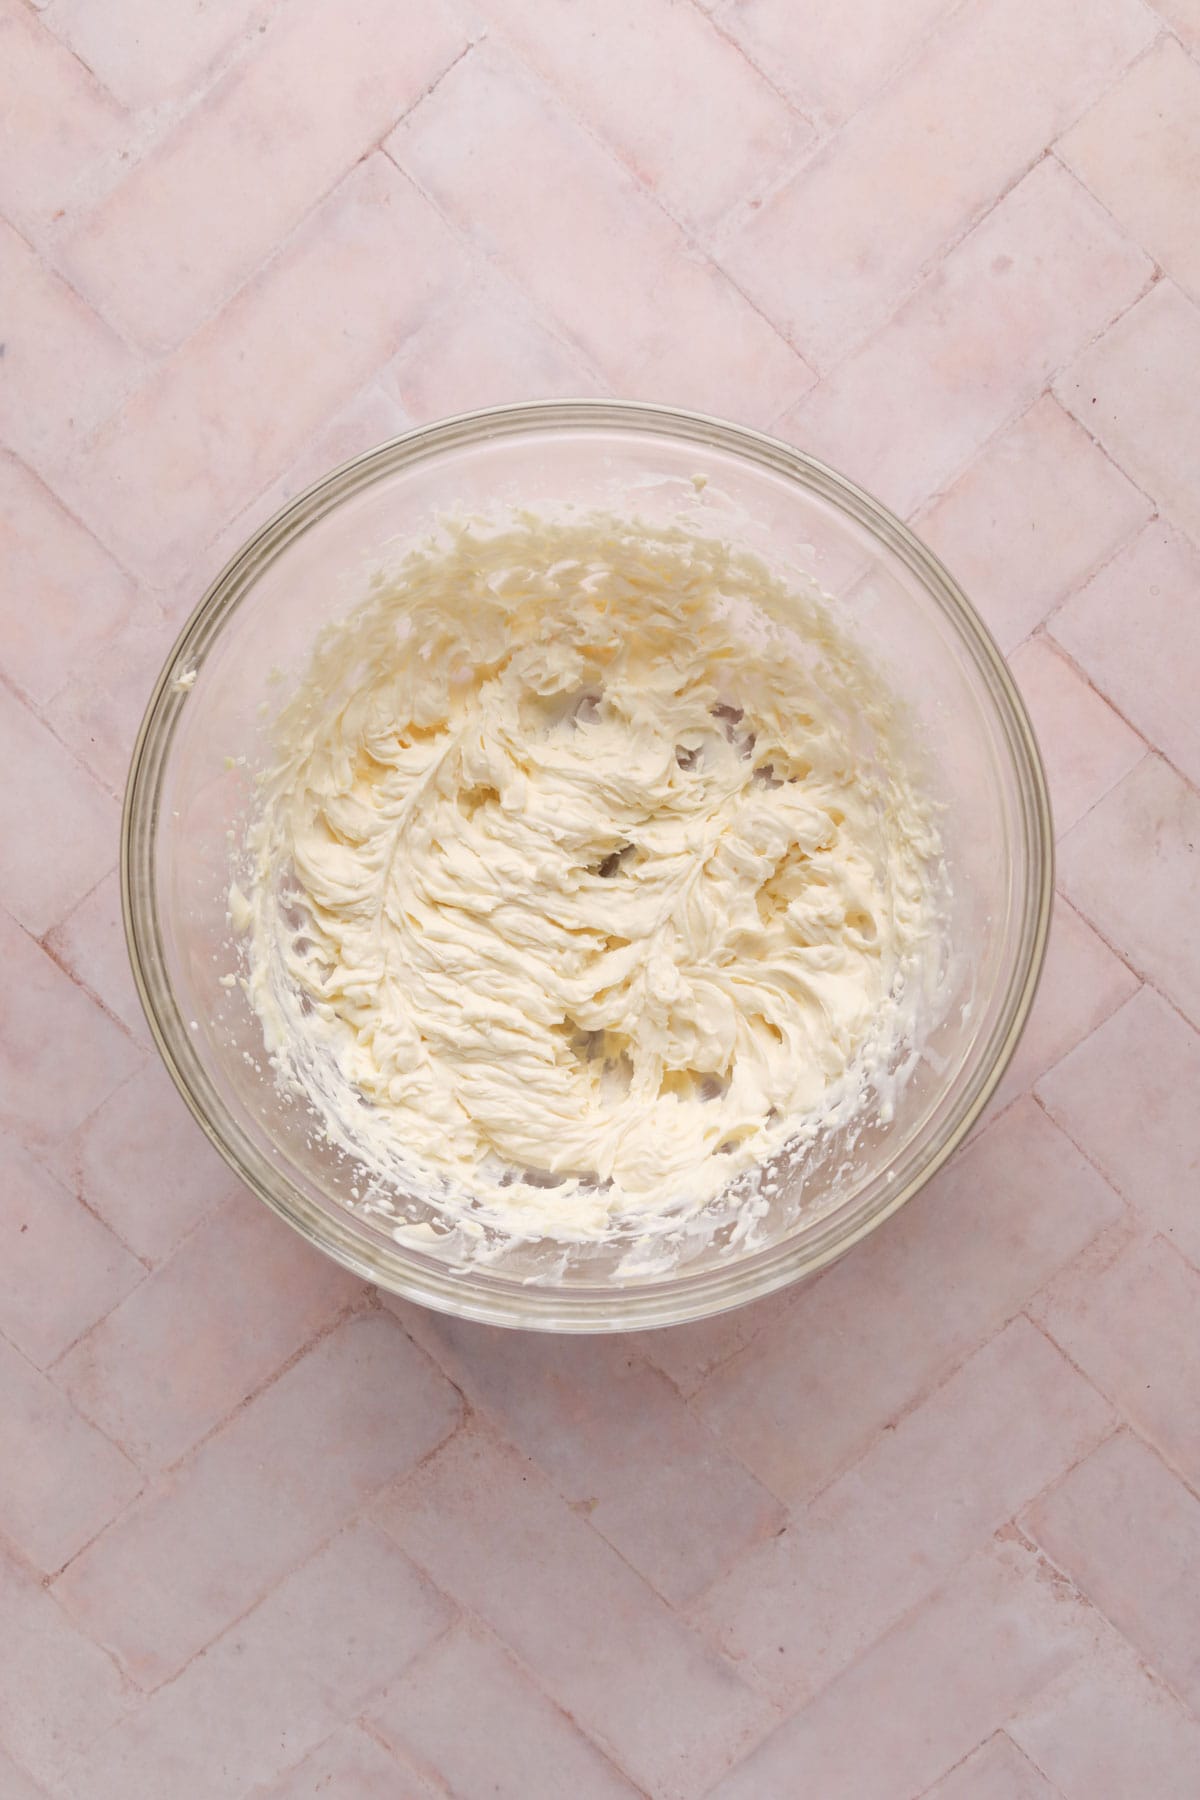 Mascarpone frosting mixed in a glass bowl.